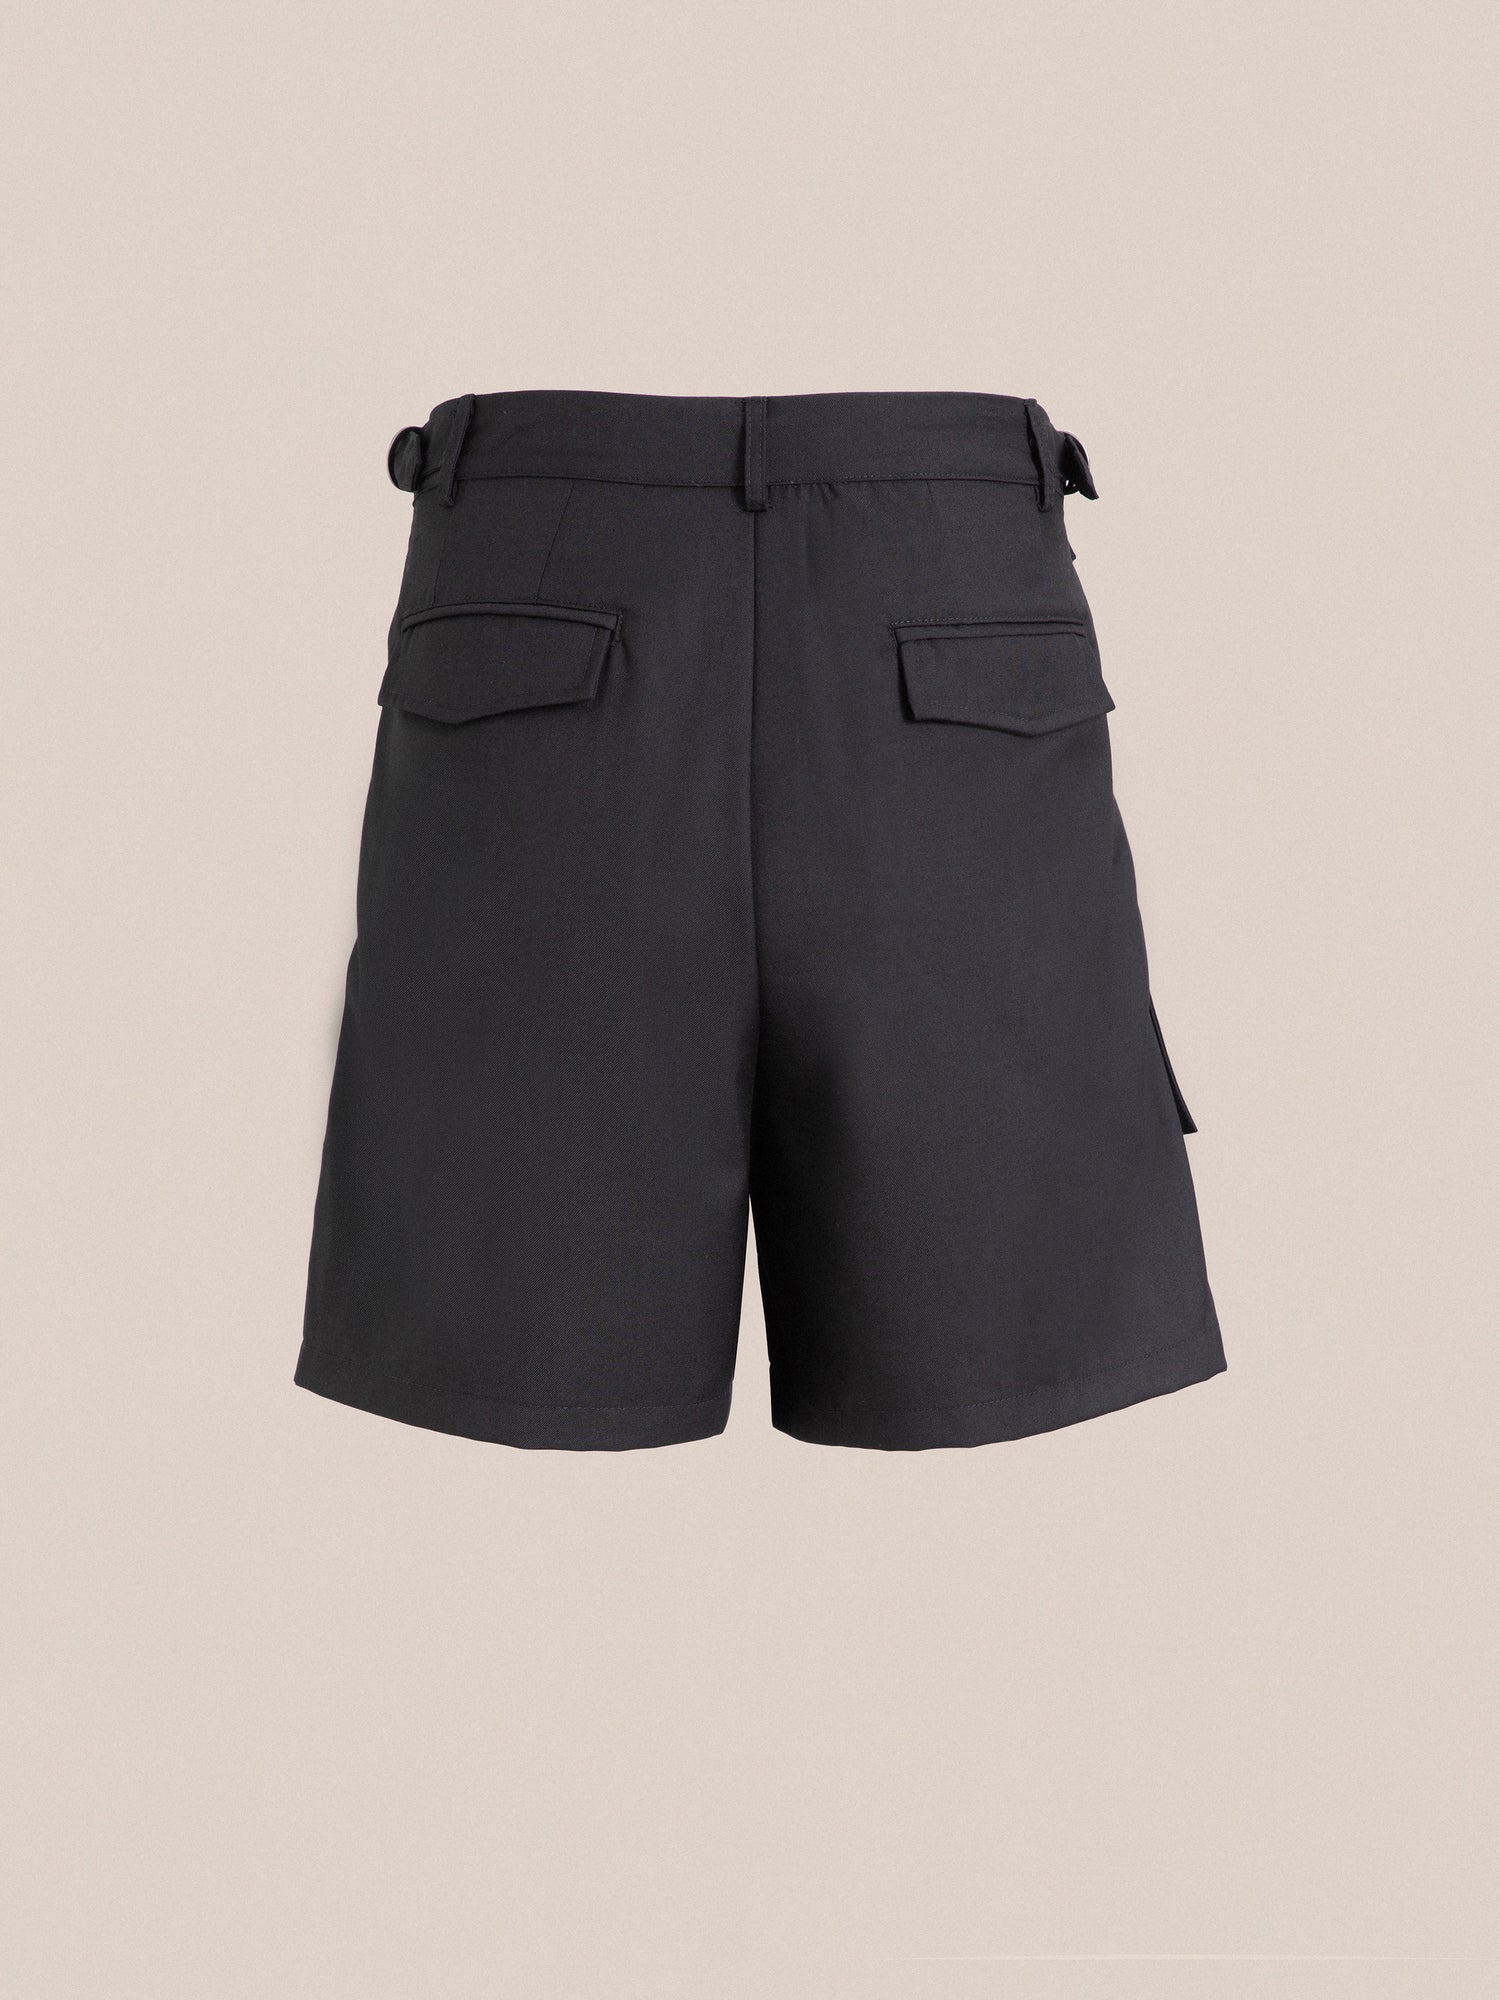 The back view of Found's elegant Pleated Pocket Cargo Shorts showcases sophistication.